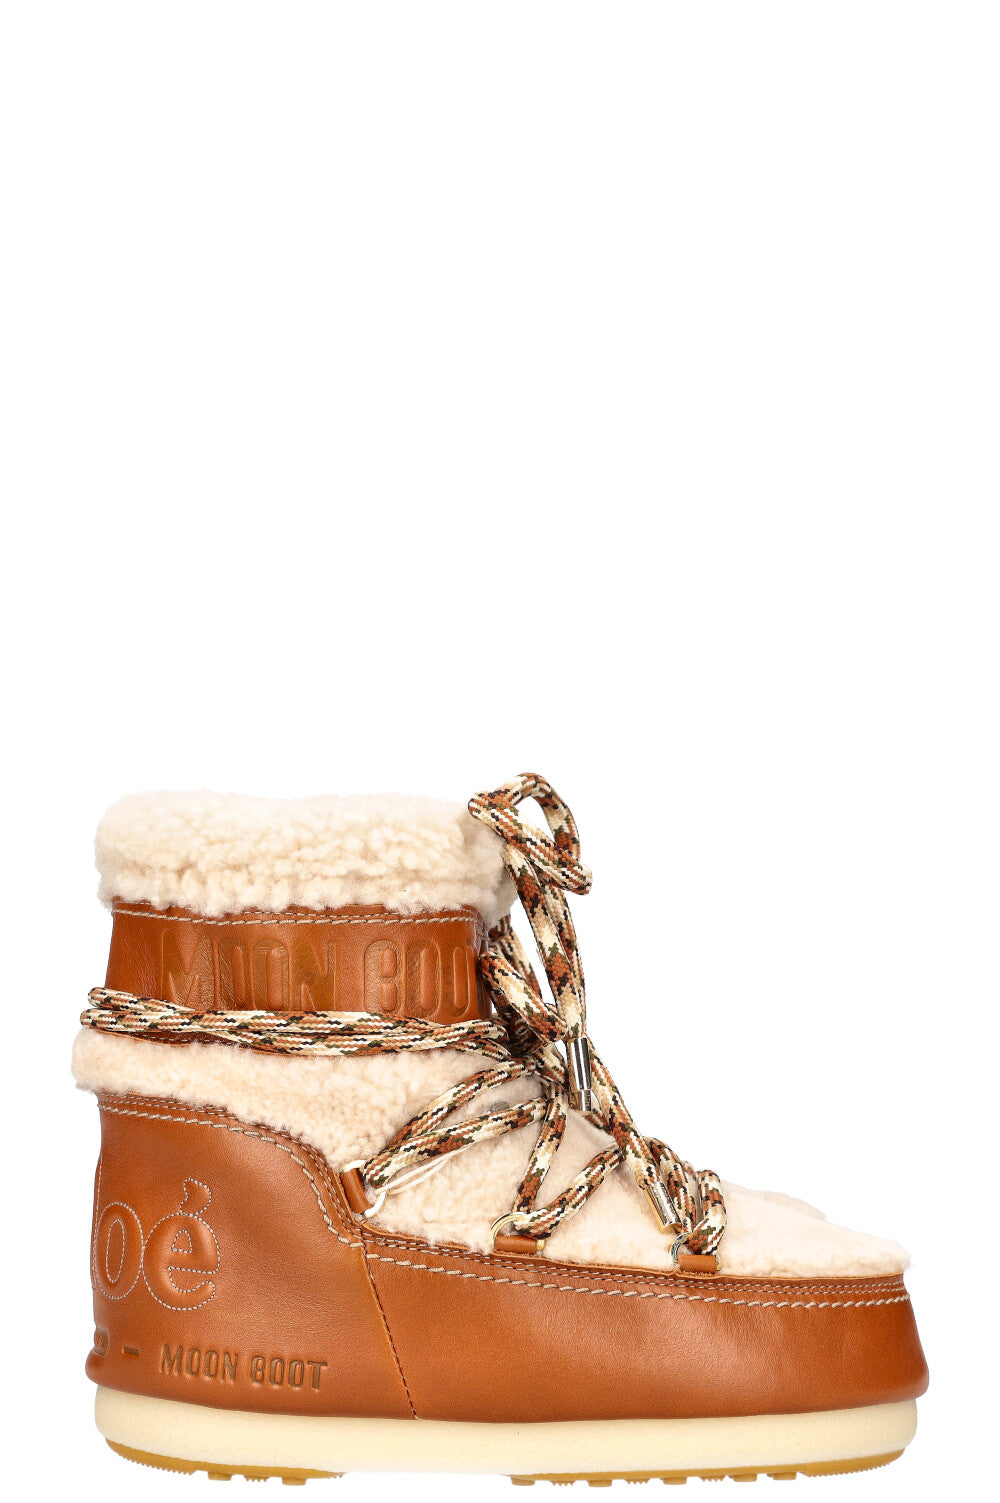 CHLOÉ x MOON BOOTS Shearling Boots Beige